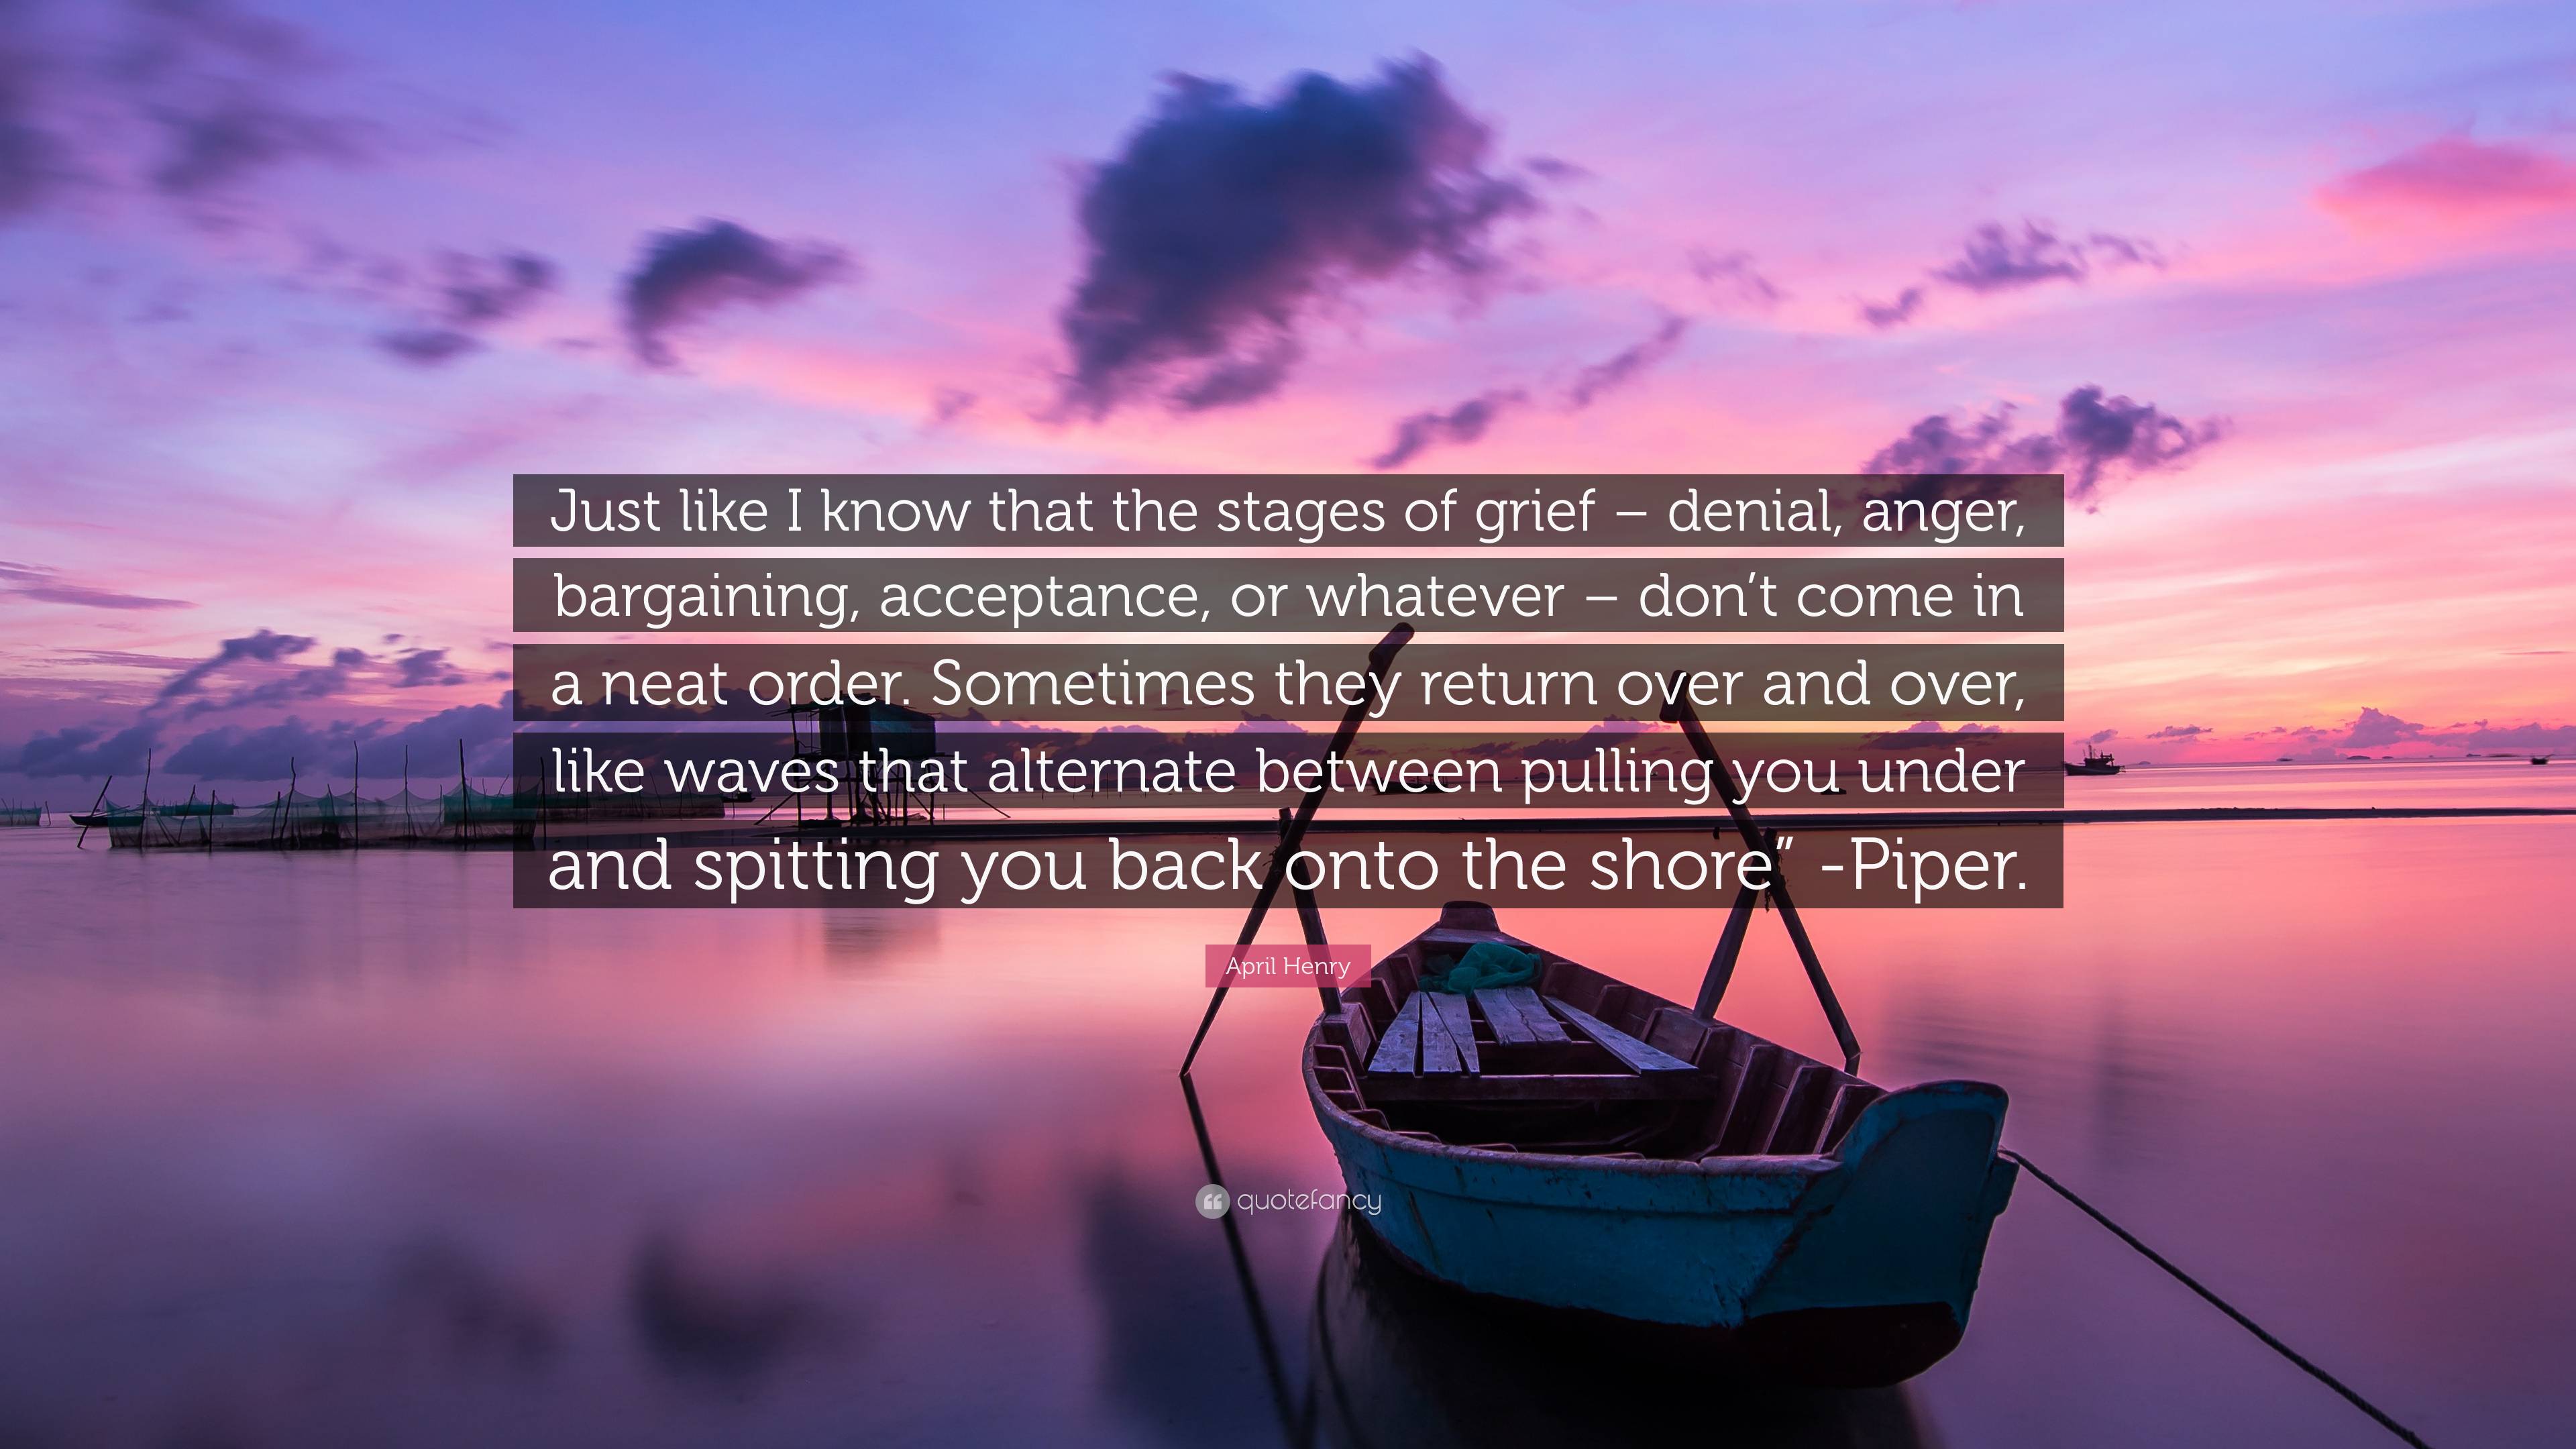 April Henry Quote: “Just like I know that the stages of grief – denial ...